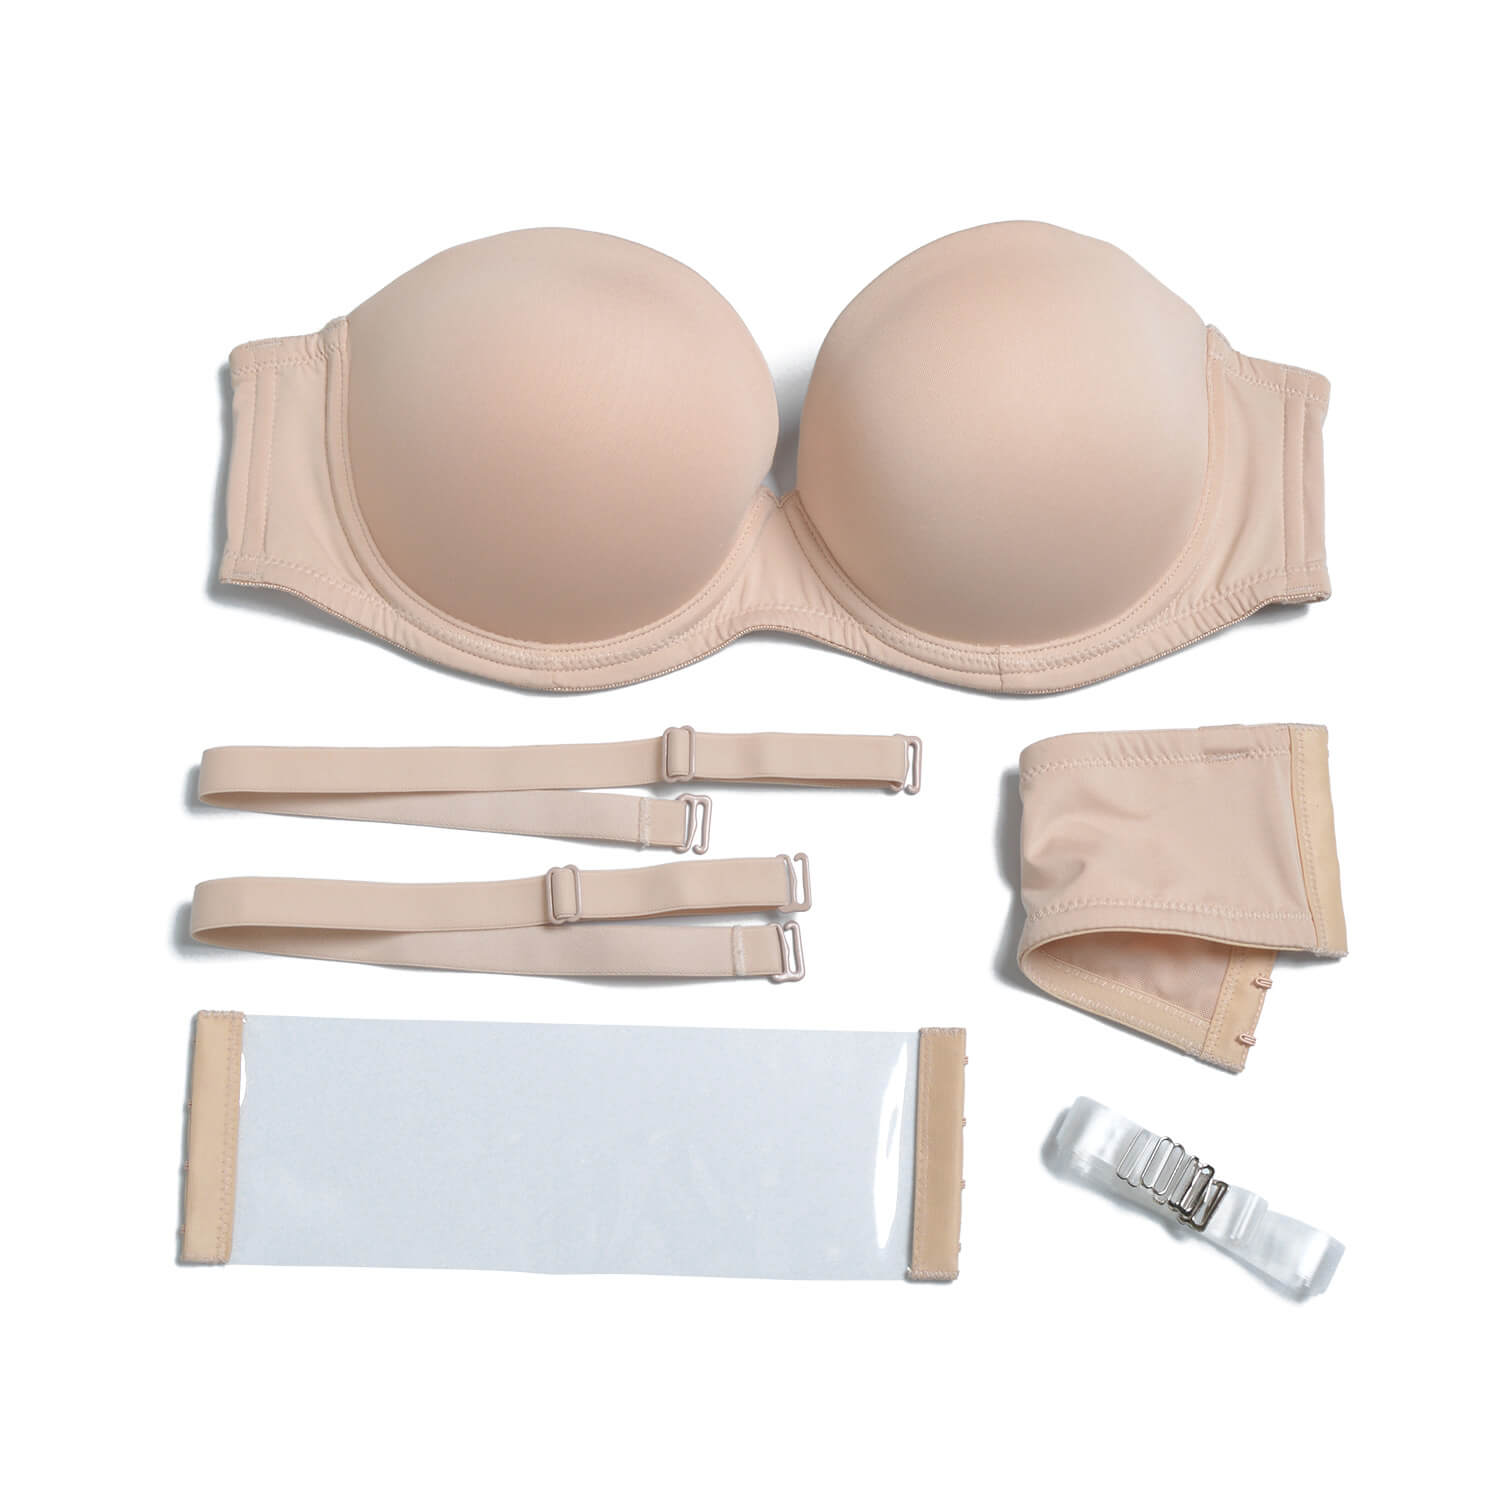 strapless clear back bra with some accessories